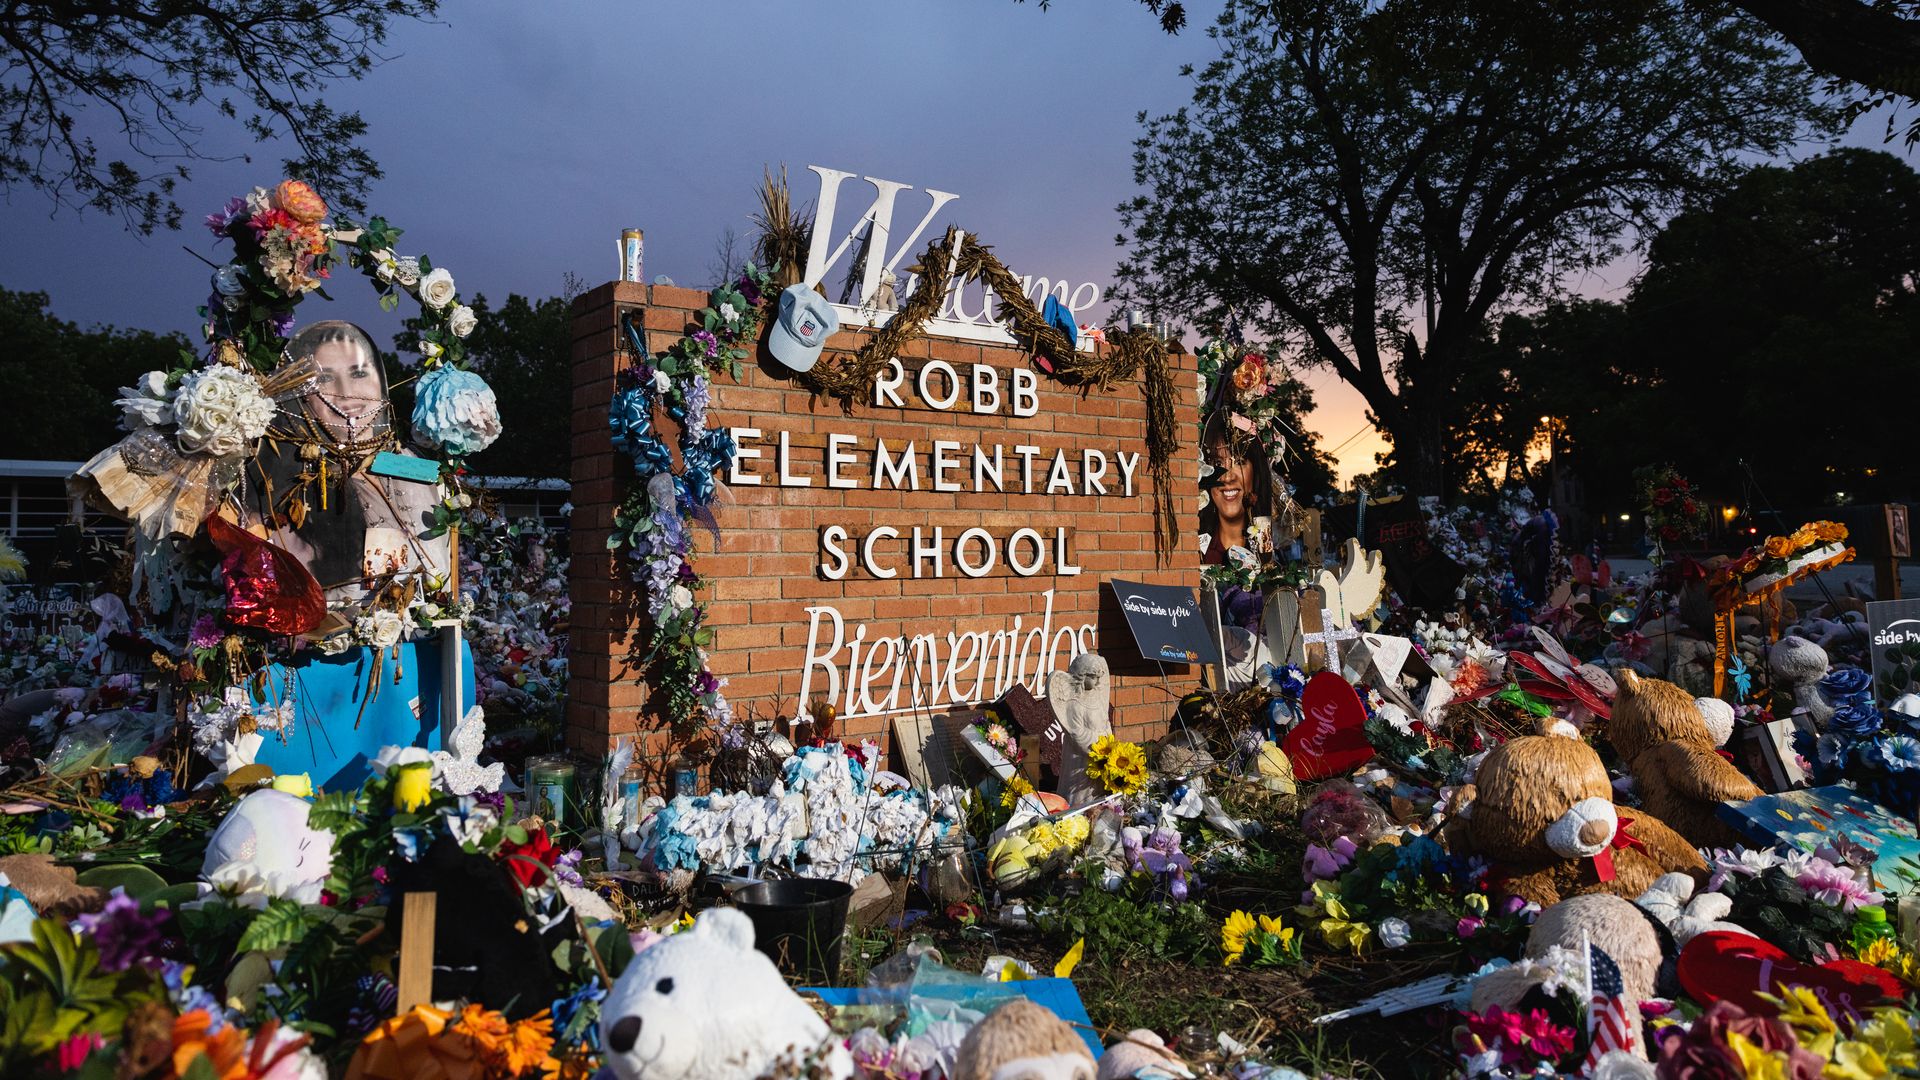 The sun sets behind the memorial for the victims of the massacre at Robb Elementary School on August 24, 2022 in Uvalde, Texas.